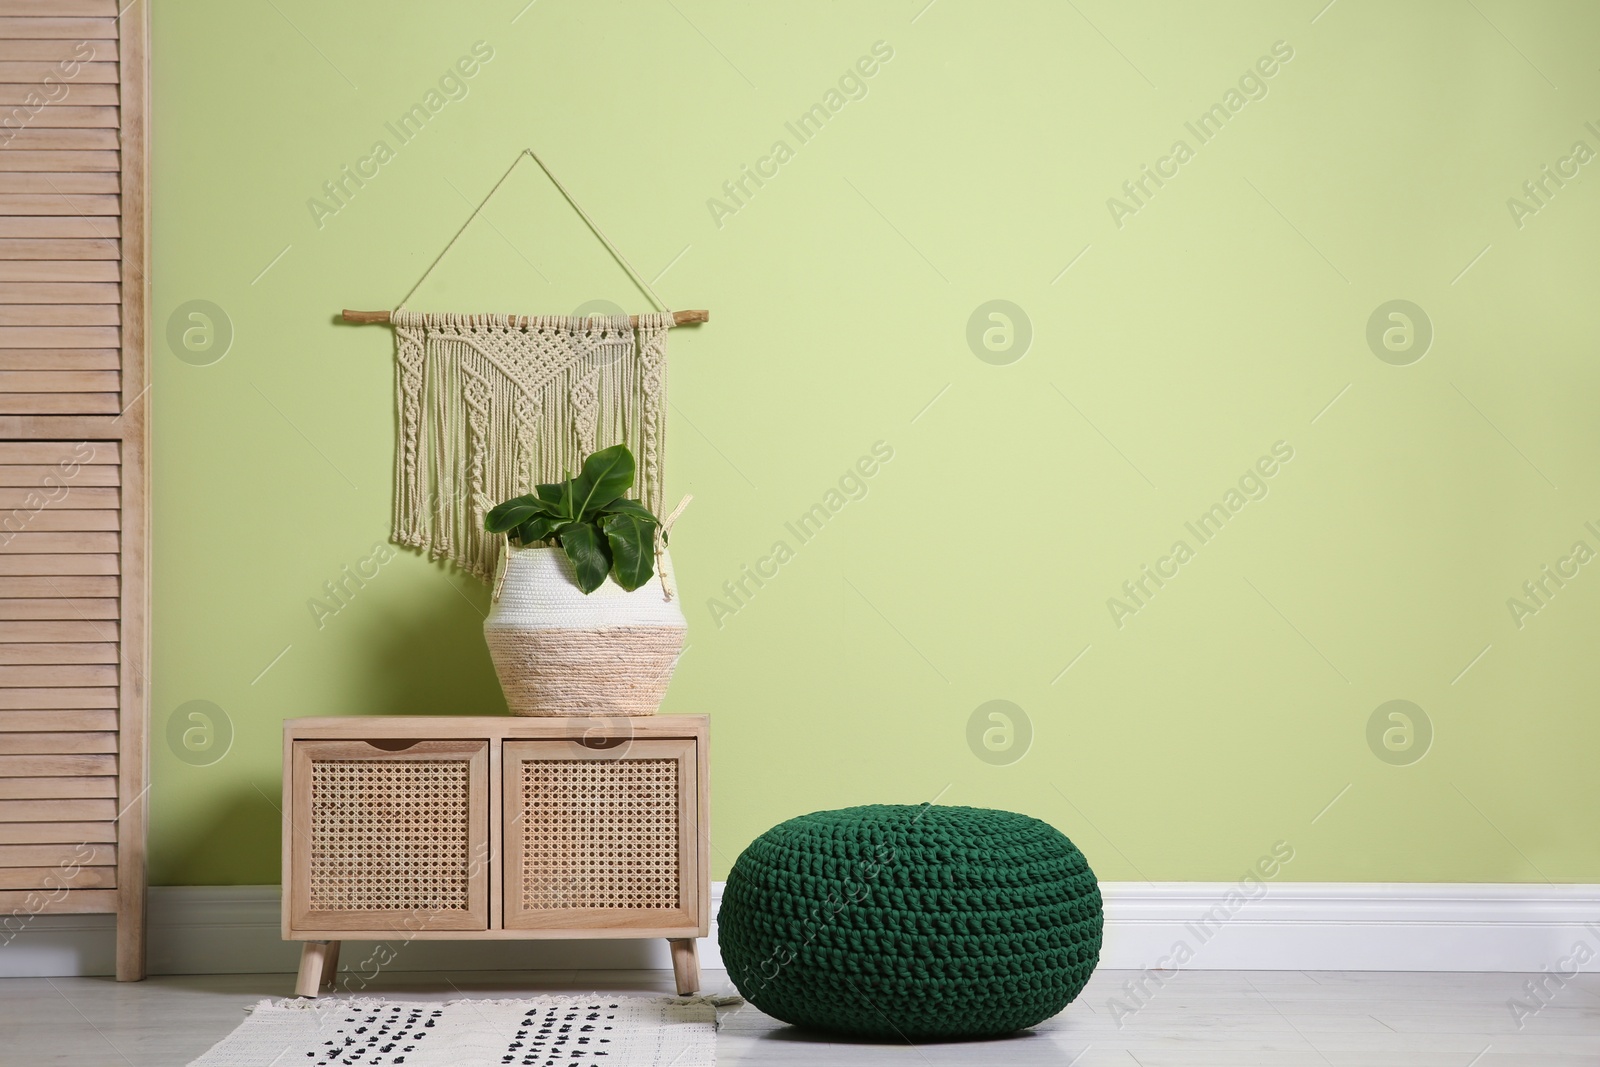 Photo of Stylish room interior with comfortable knitted pouf, wooden furniture and plant near light green wall, space for text